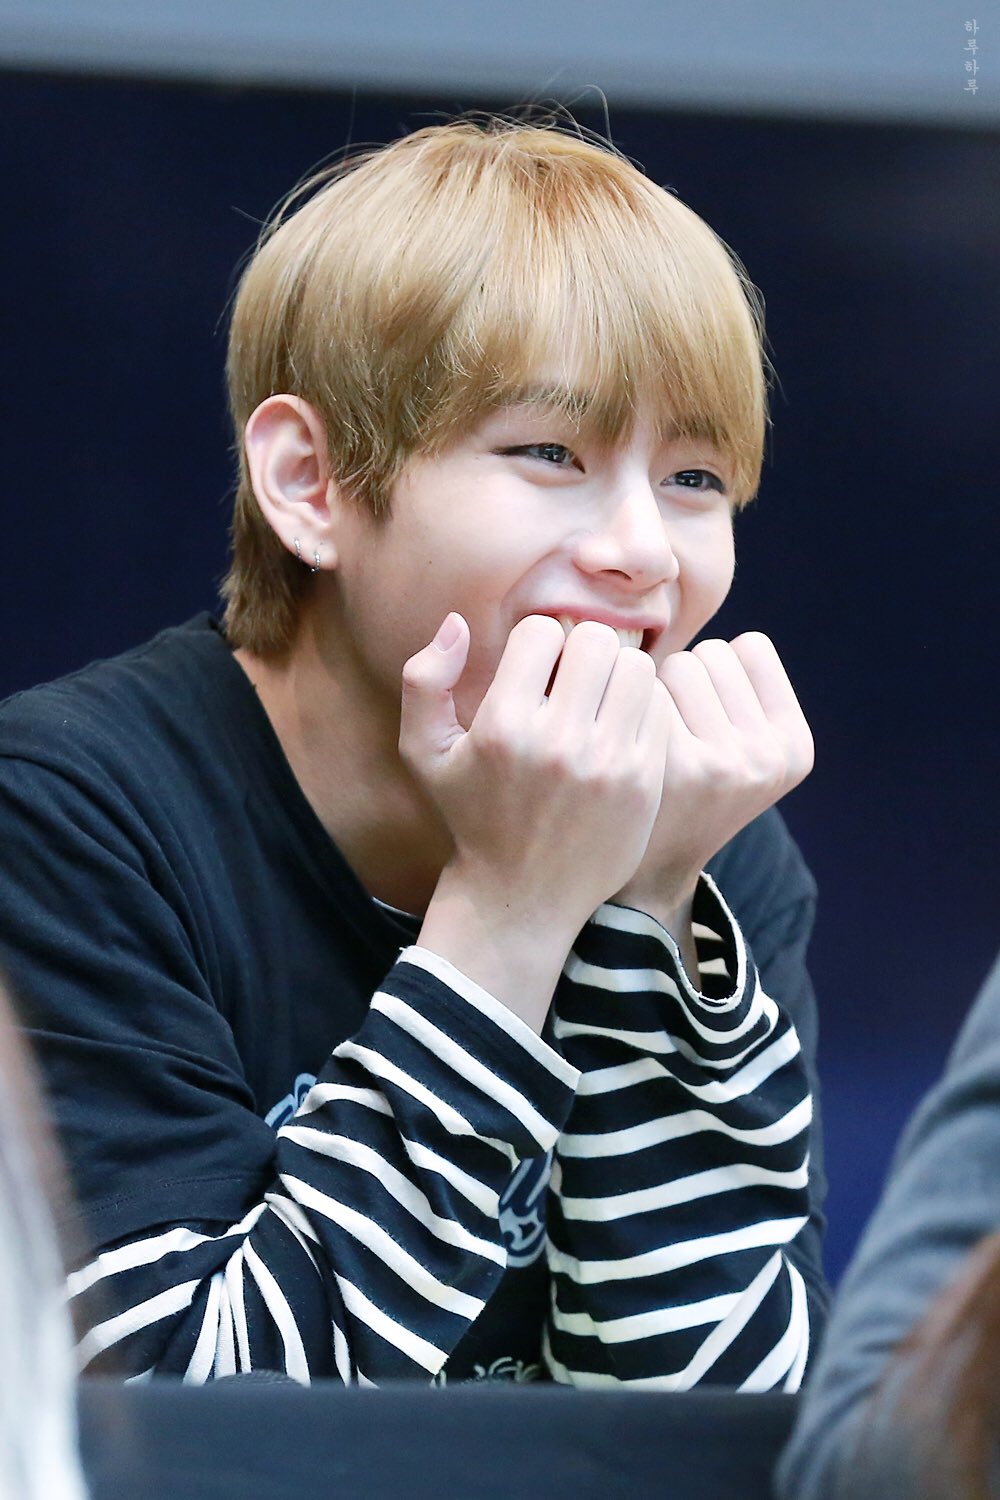 Taehyung Smile Wallpapers - Wallpaper Cave